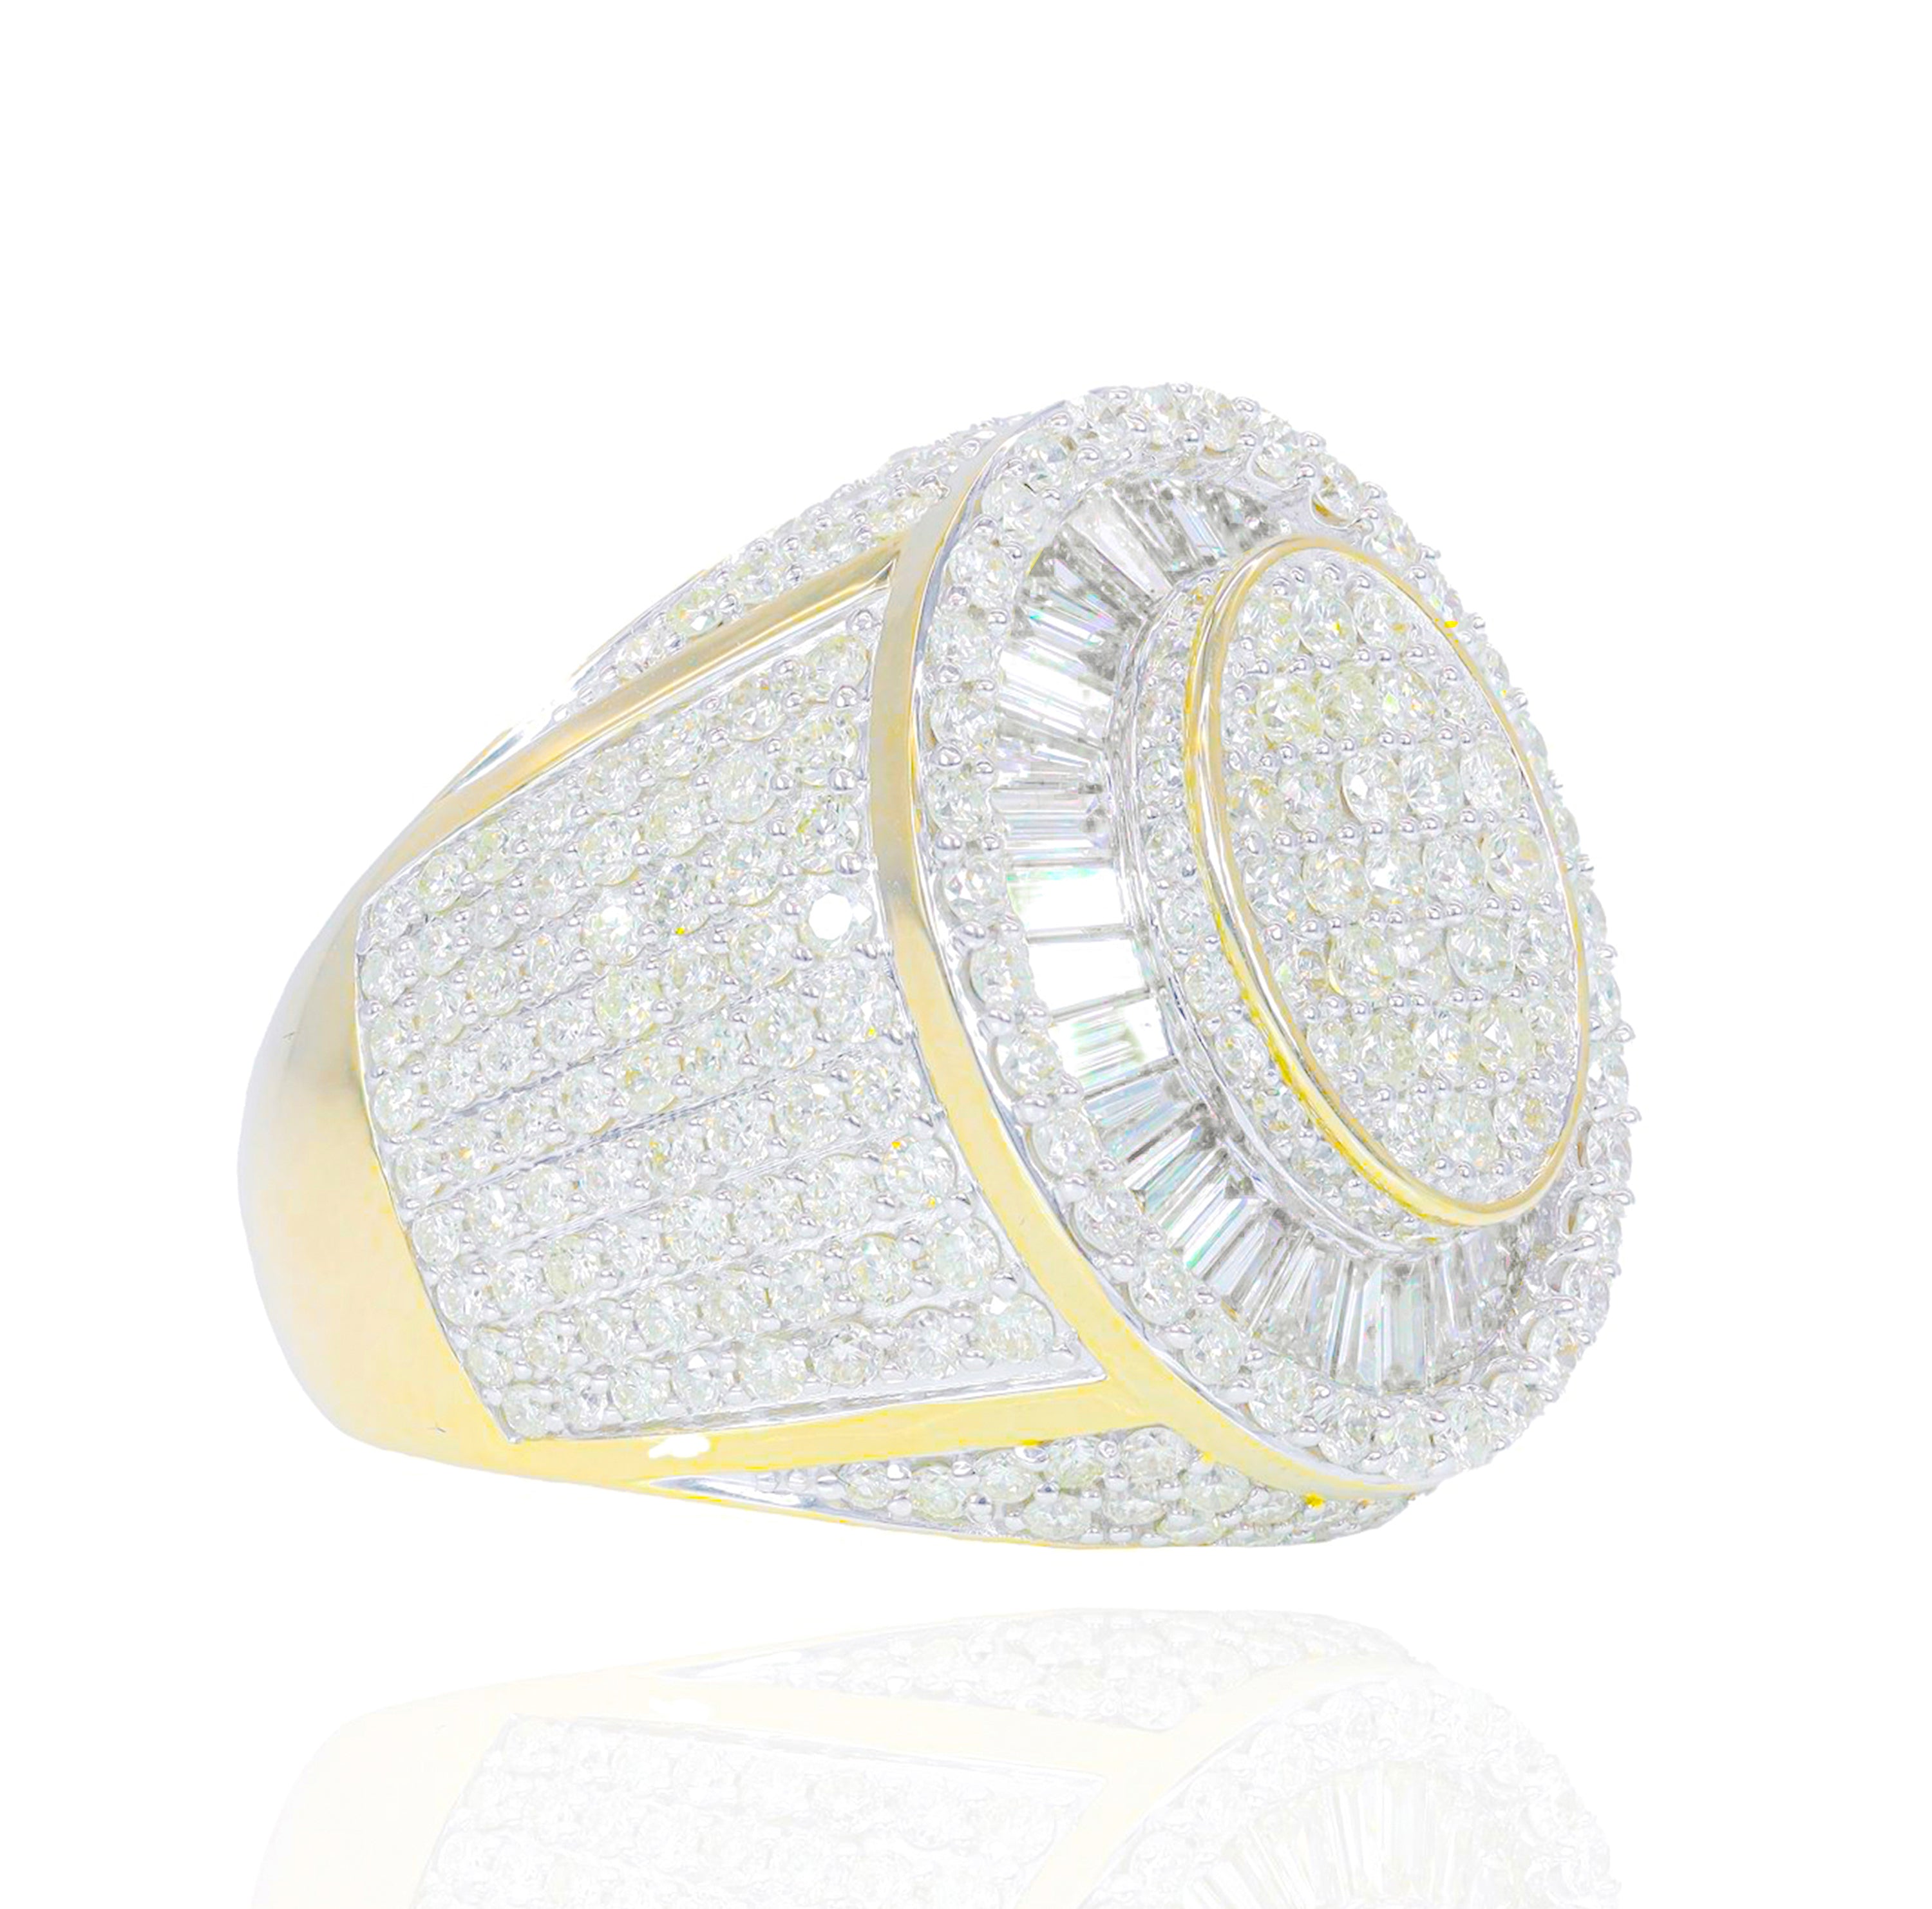 Baguette & White Round Diamond Oval Shaped Ring